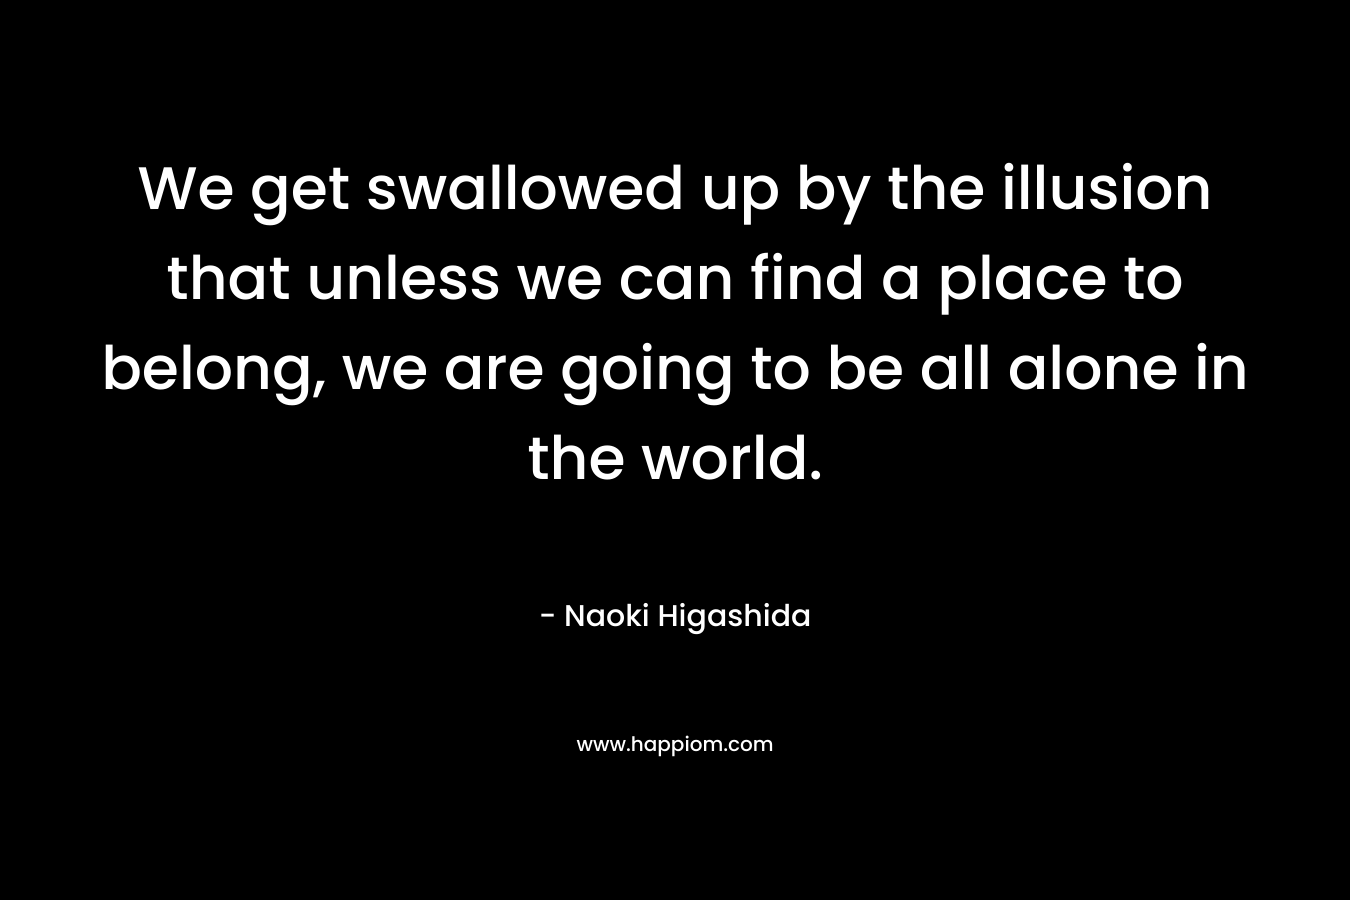 We get swallowed up by the illusion that unless we can find a place to belong, we are going to be all alone in the world. – Naoki Higashida